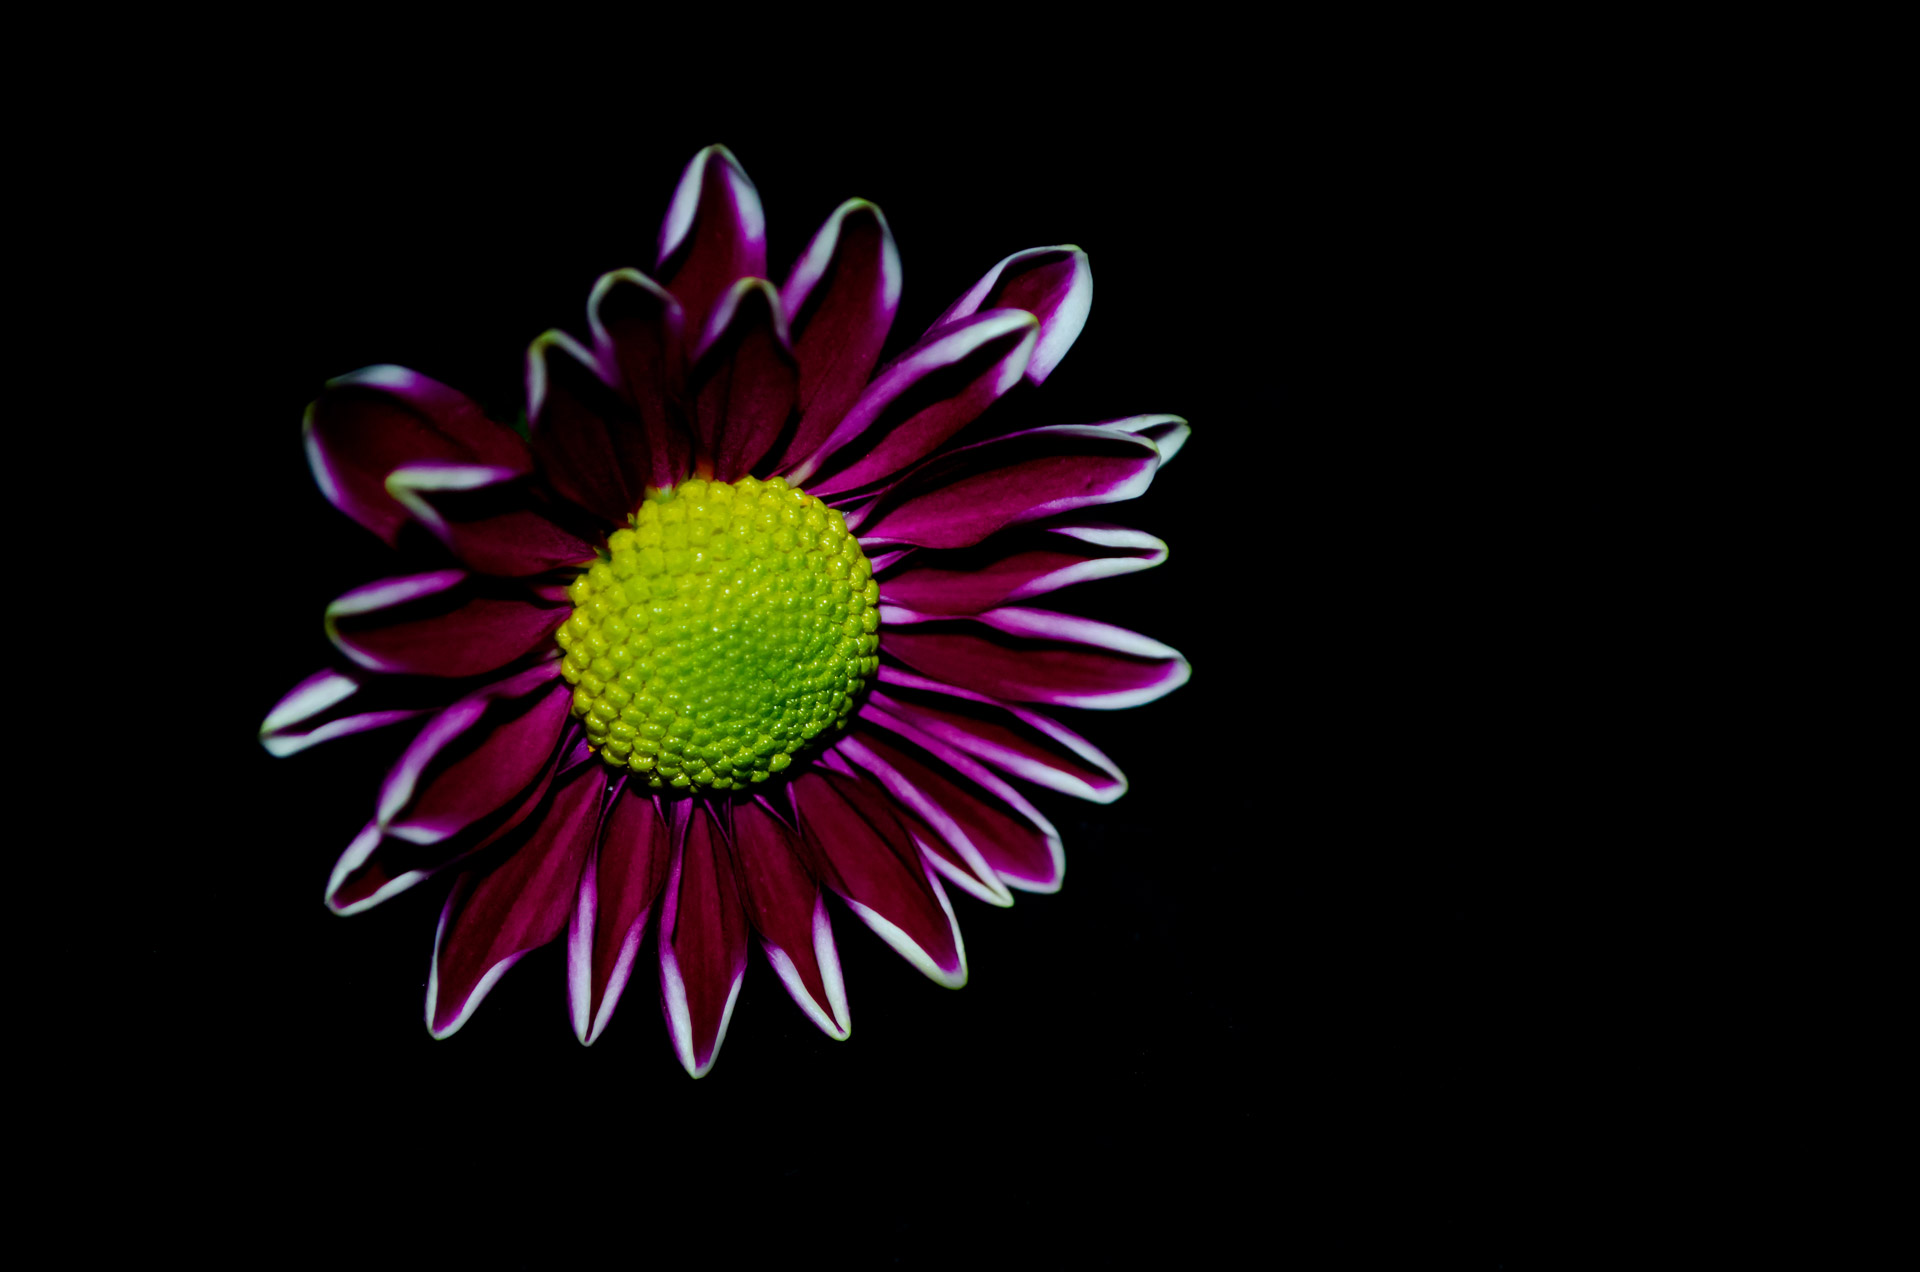 Flower On The Black Background Free Stock Photo - Public Domain Pictures